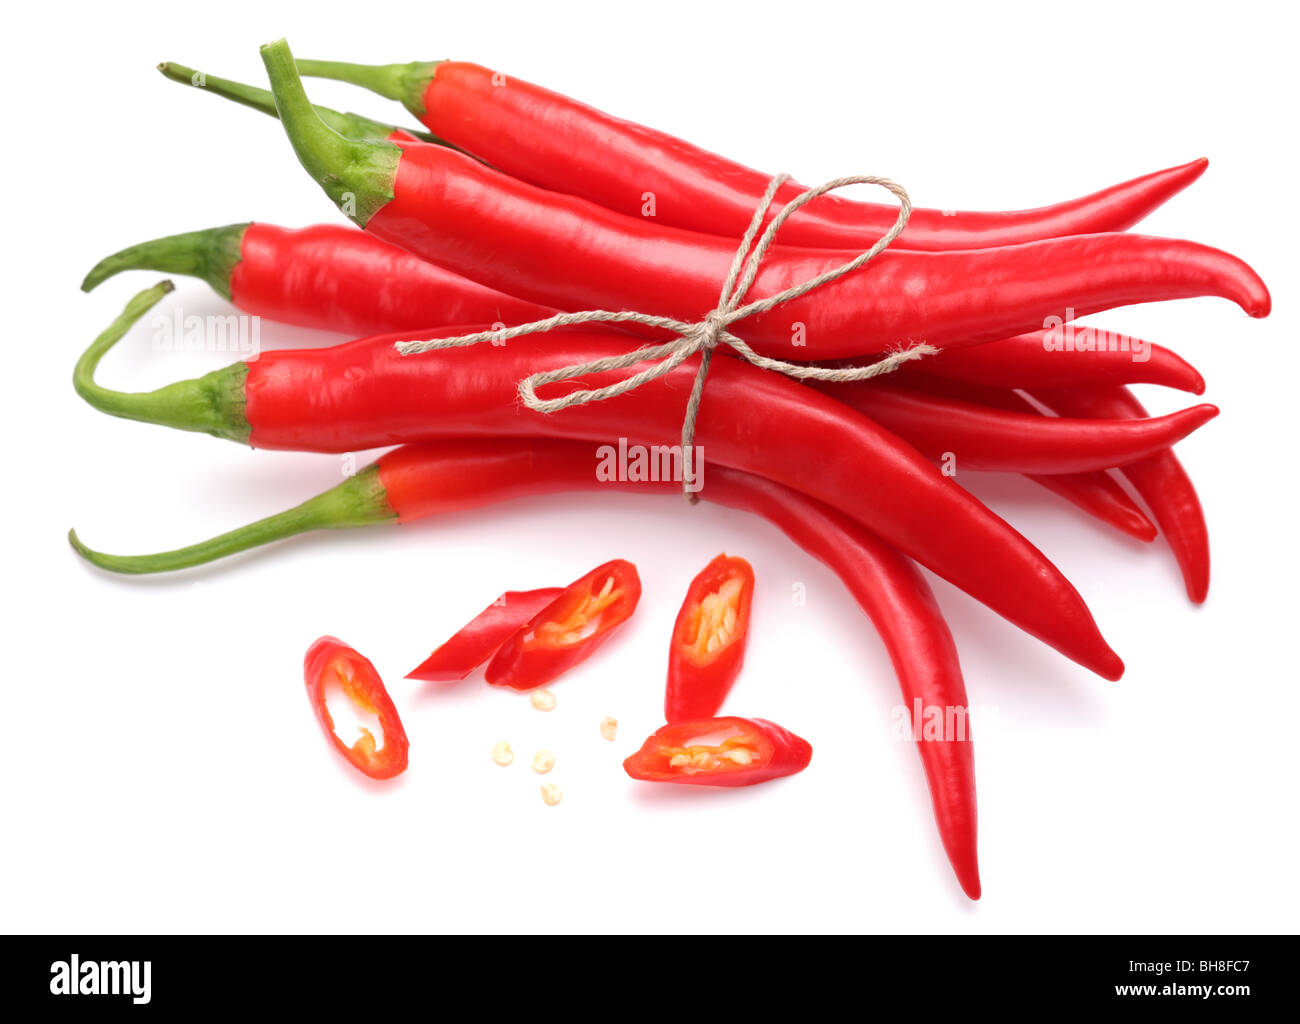 Chilean red pepper slices and seeds on a white background Stock Photo